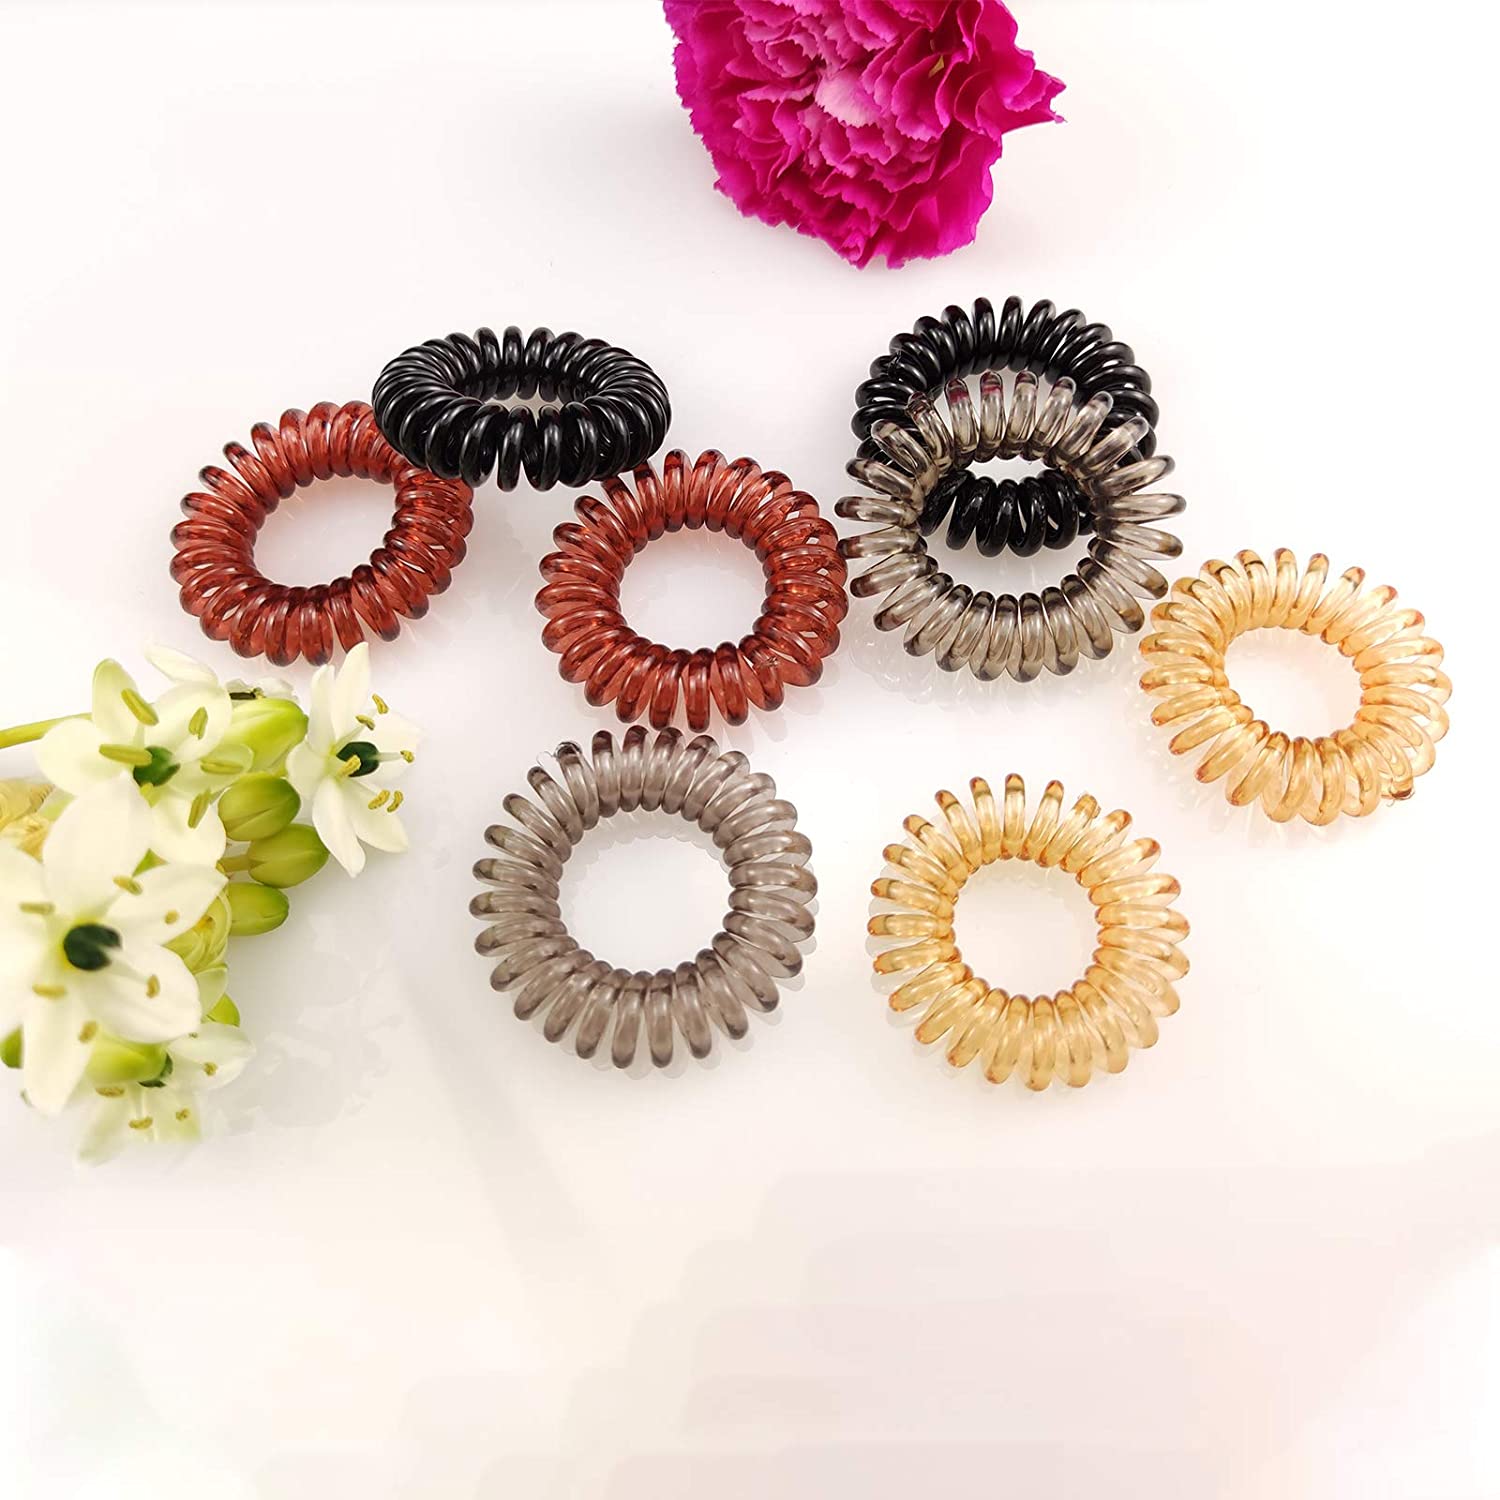 Spiral Hair Ties (8 Pieces), Coil Hair Ties for Thick Hair, Ponytail Holder Hair Ties for Women (four Colors), No Crease Hair Ties, Phone Cord Hair Ties for all Hair Types with Plastic Spiral. - image 3 of 7